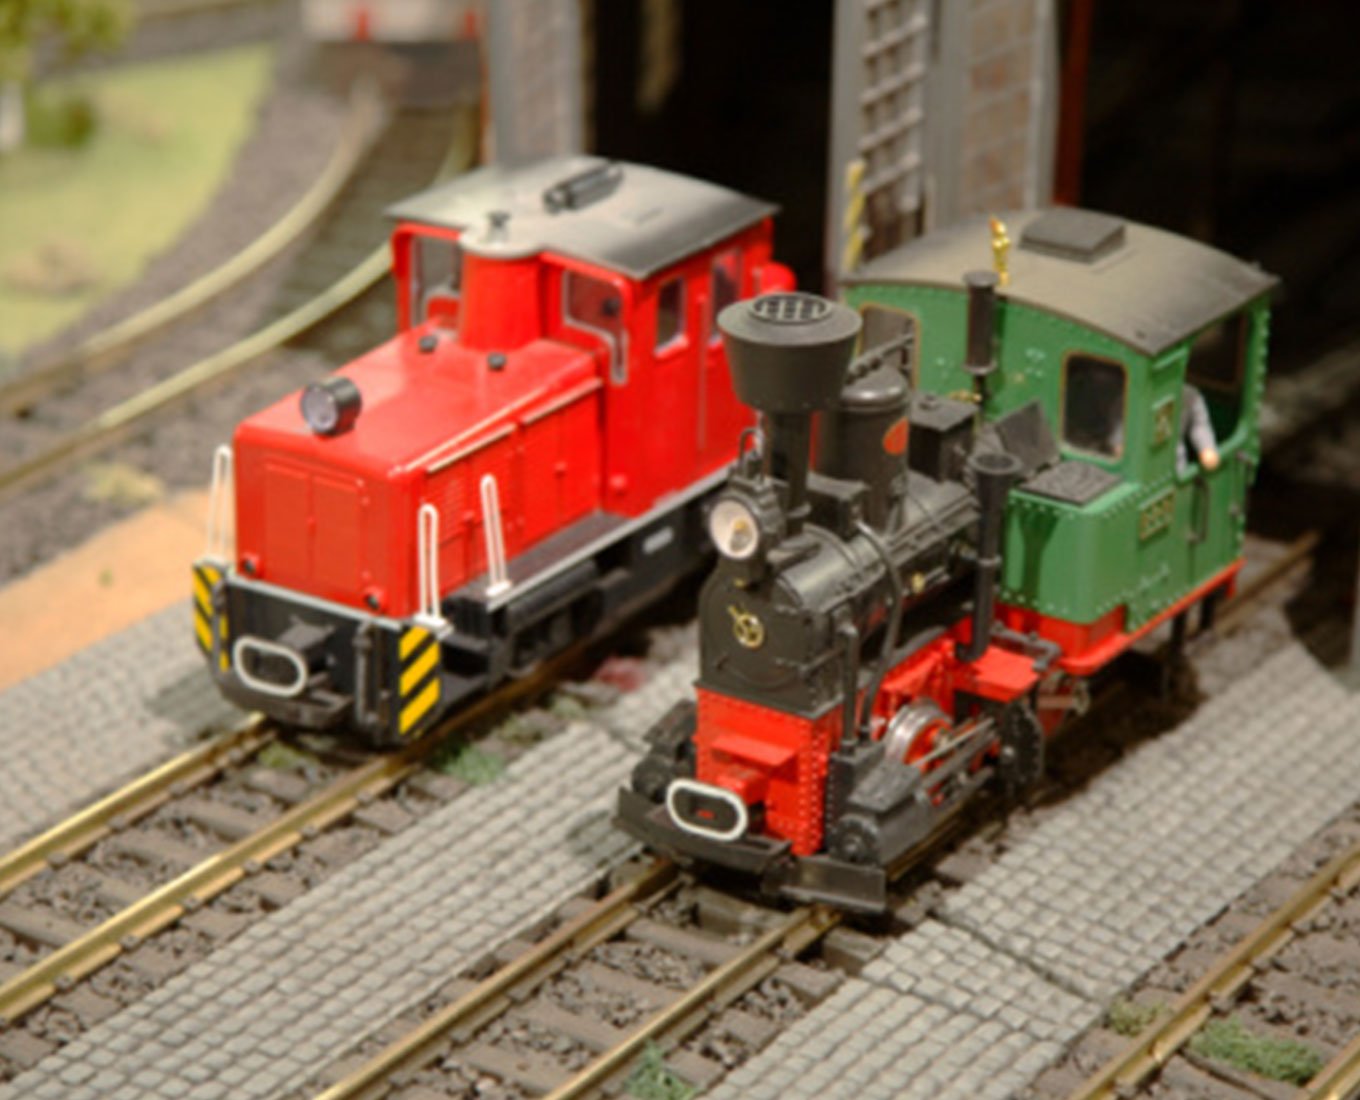 Model trains - Custom foam inserts, boxes and other solutions to store and  transport your model railway collection